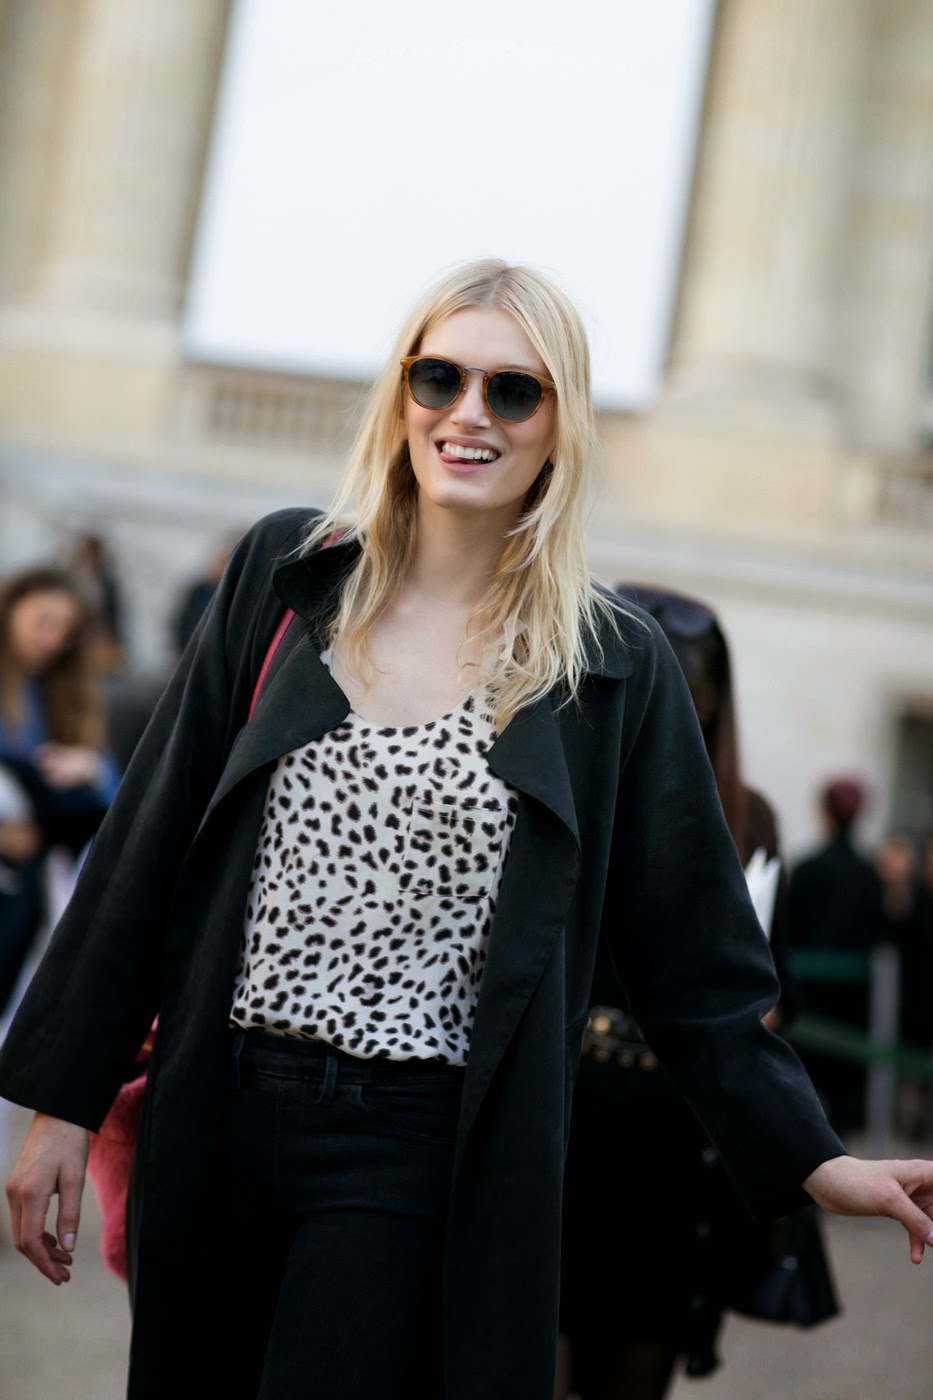 Model Street Style: Lily Donaldson in Animal Print - The Front Row View